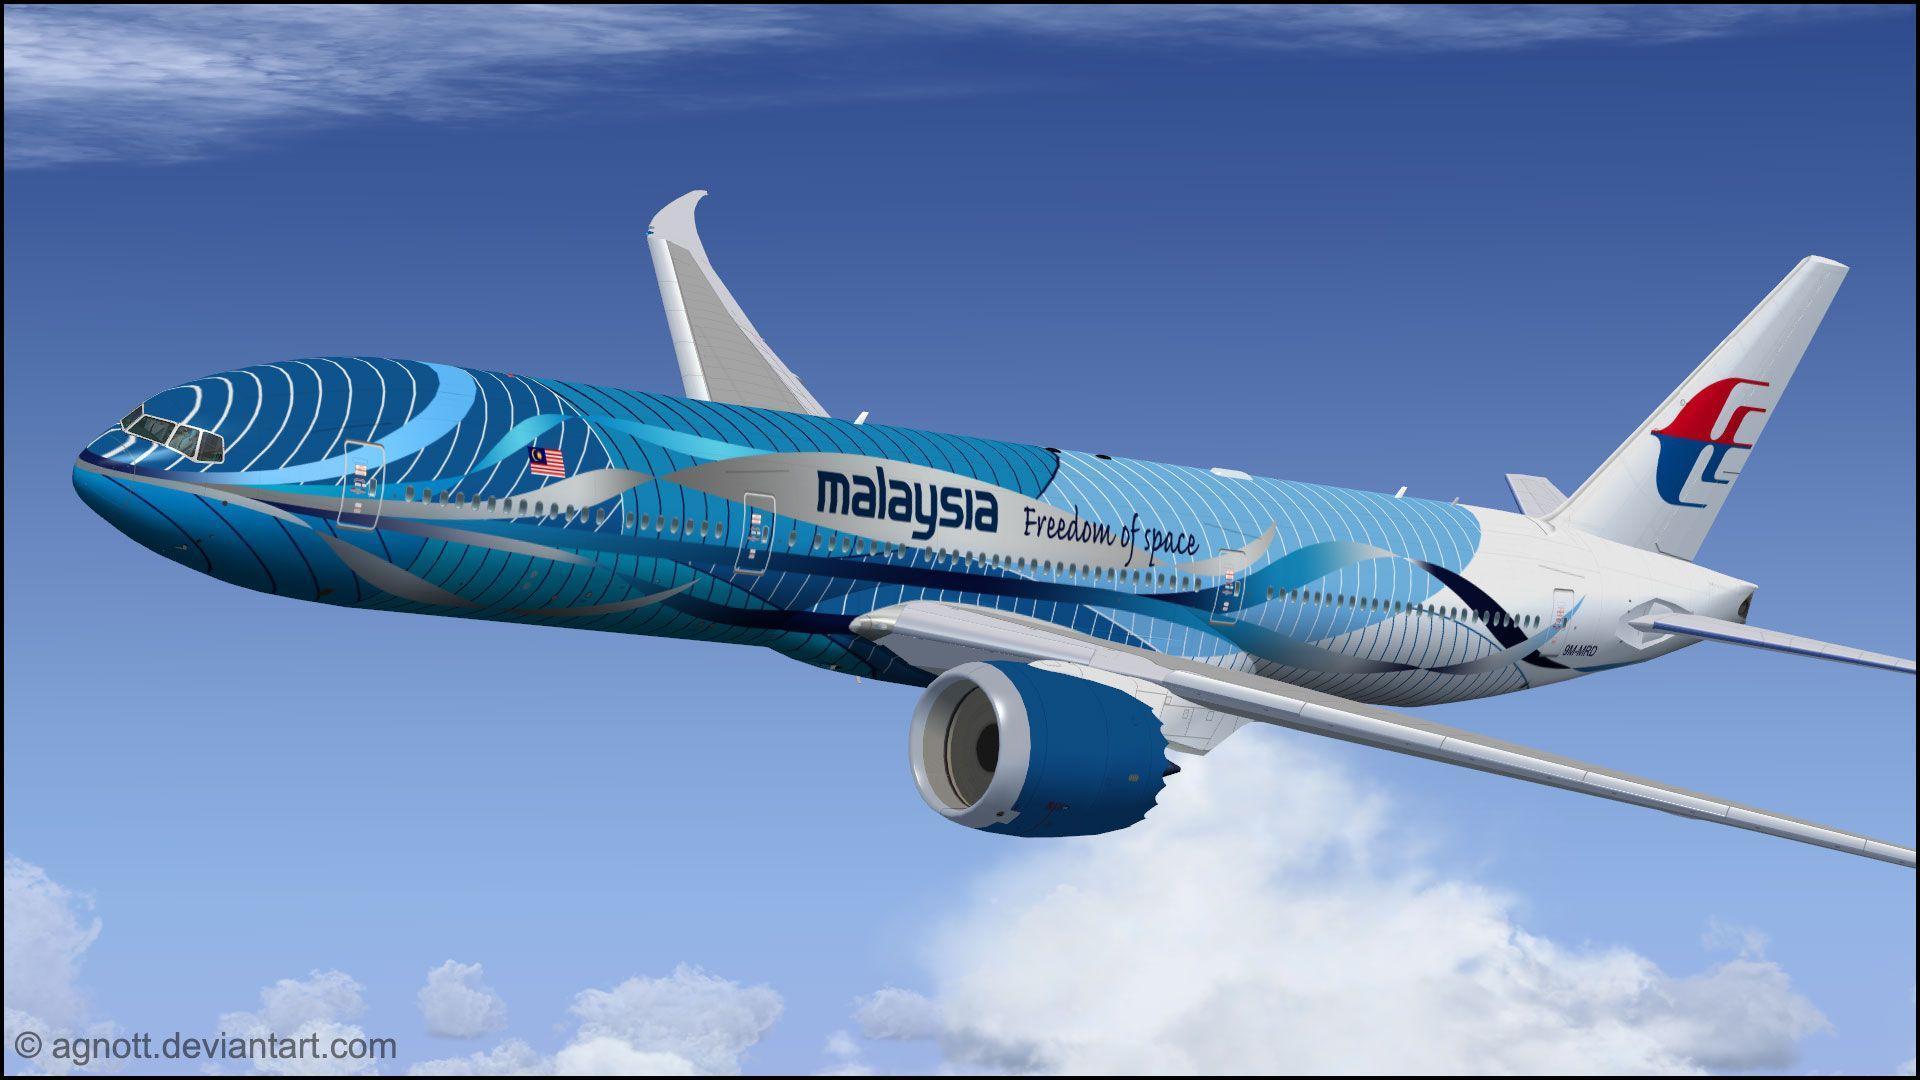 AMB Wallpaper provides you the latest Malaysia Airlines